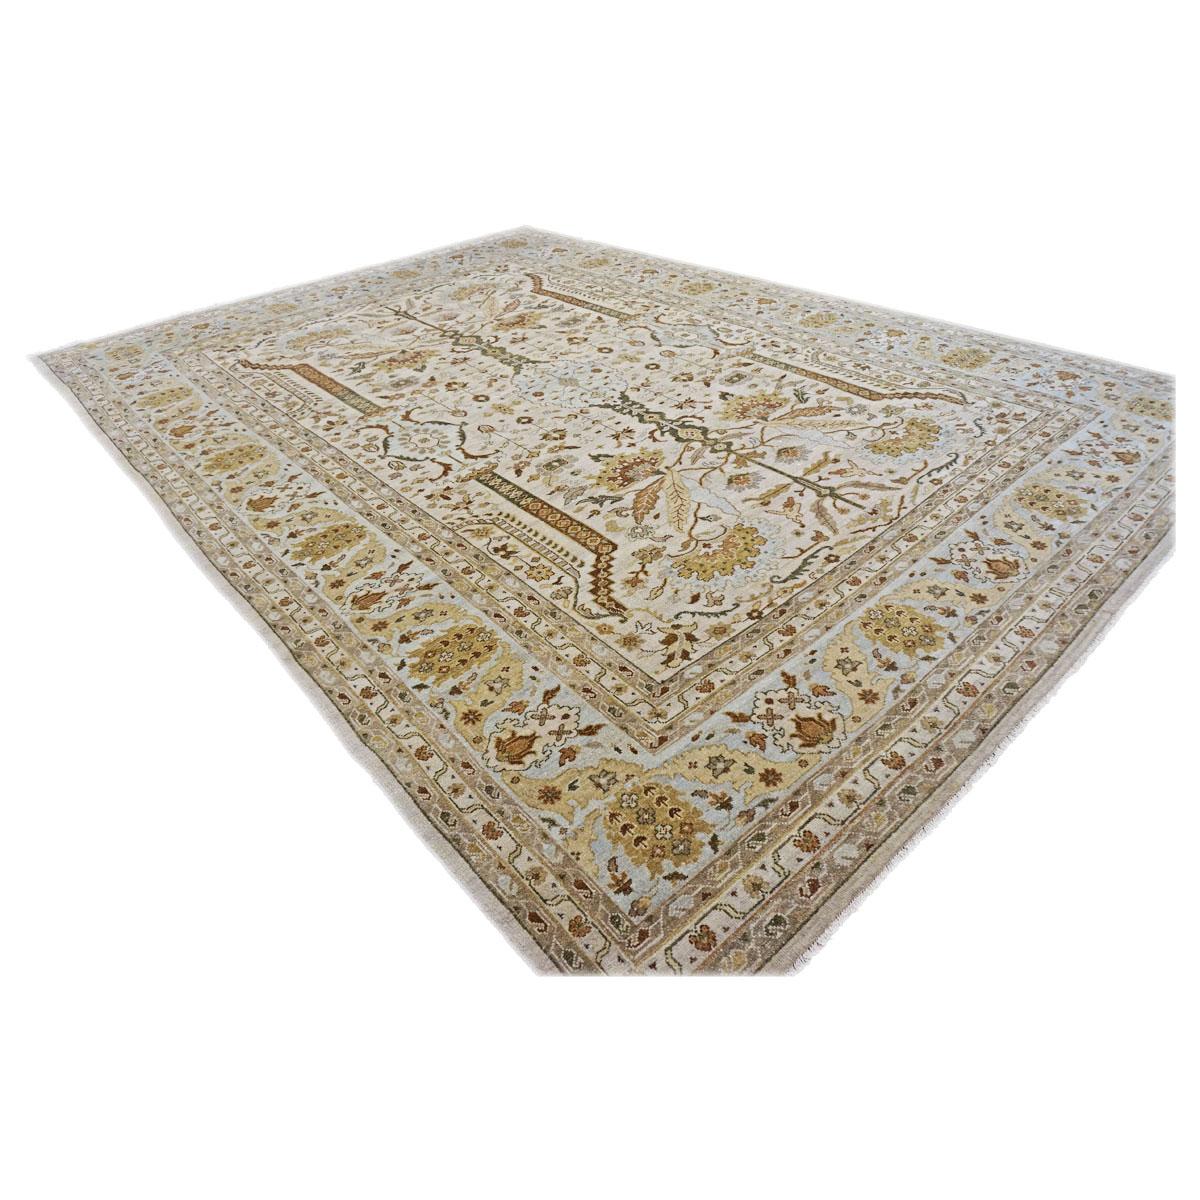 21st Century Sultanabad Master 10x14 Ivory, Tan, & Blue Handmade Area Rug In Excellent Condition For Sale In Houston, TX